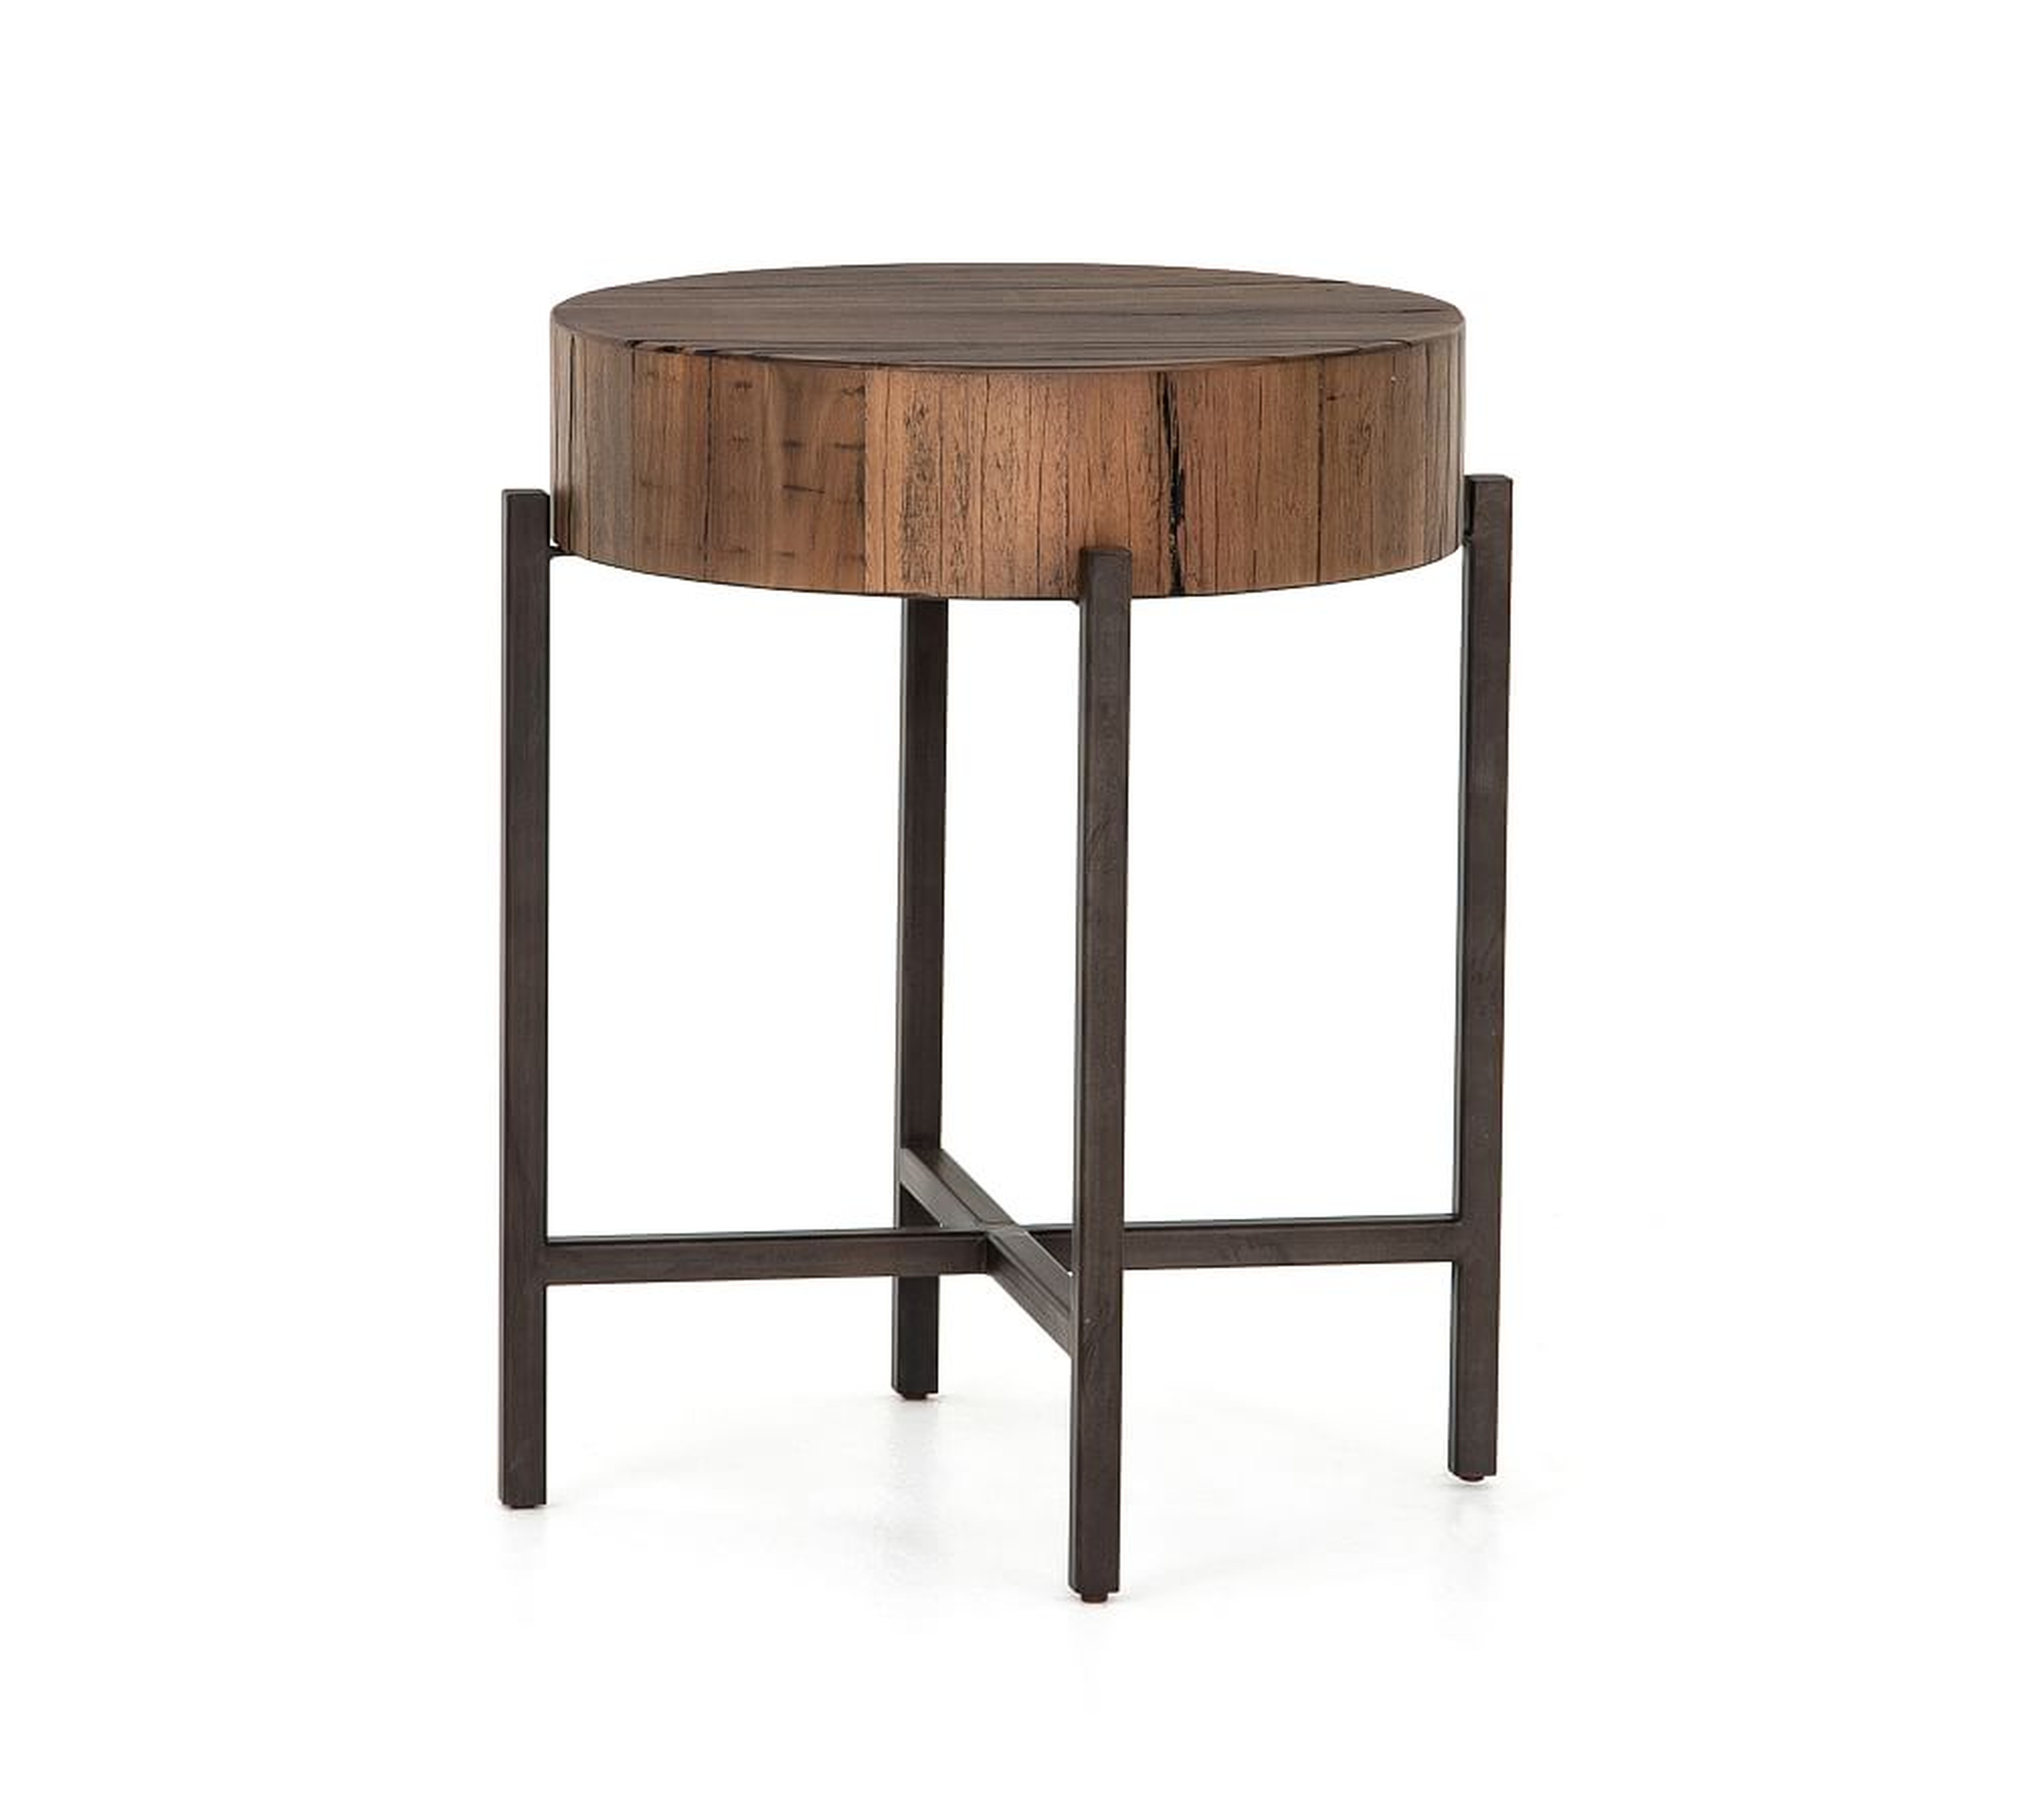 Fargo Reclaimed Wood Round End Table, Natural Brown - Pottery Barn